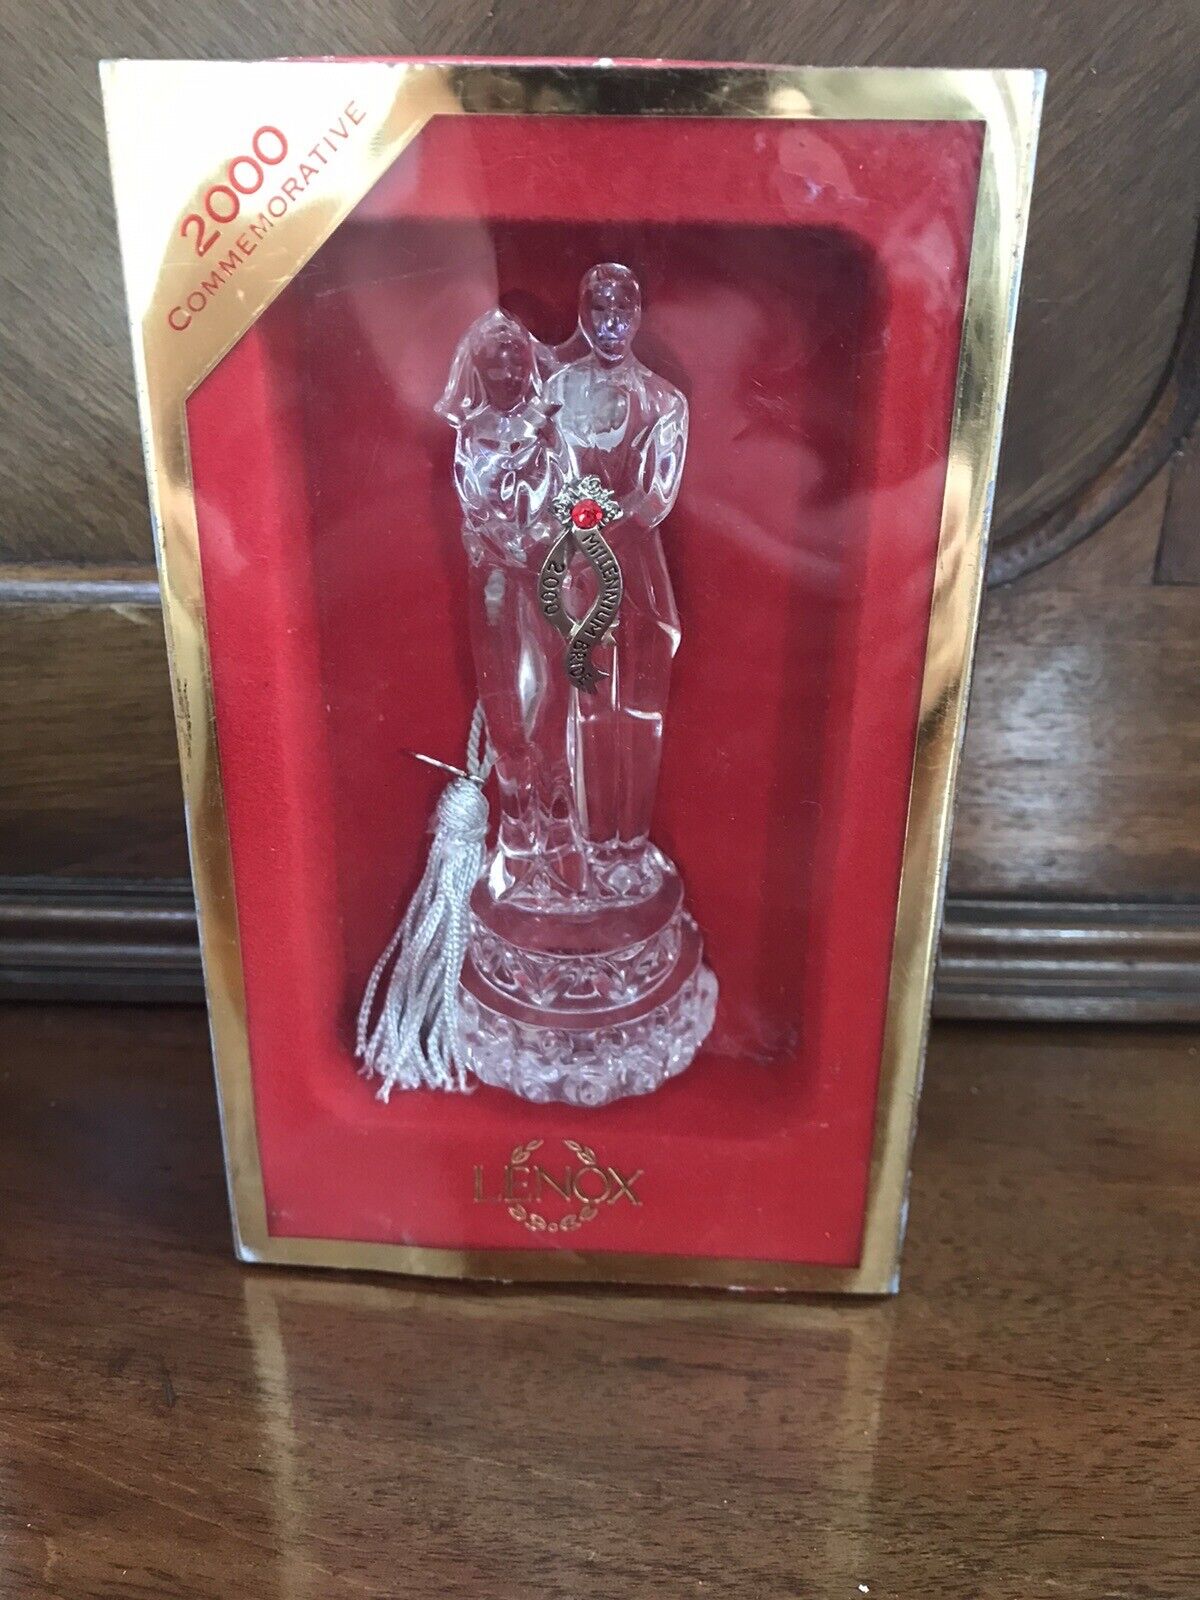 LENOX CRYSTAL 2004 BRIDE AND GROOM Ornament Cake Topper Anniversary Red Crystal